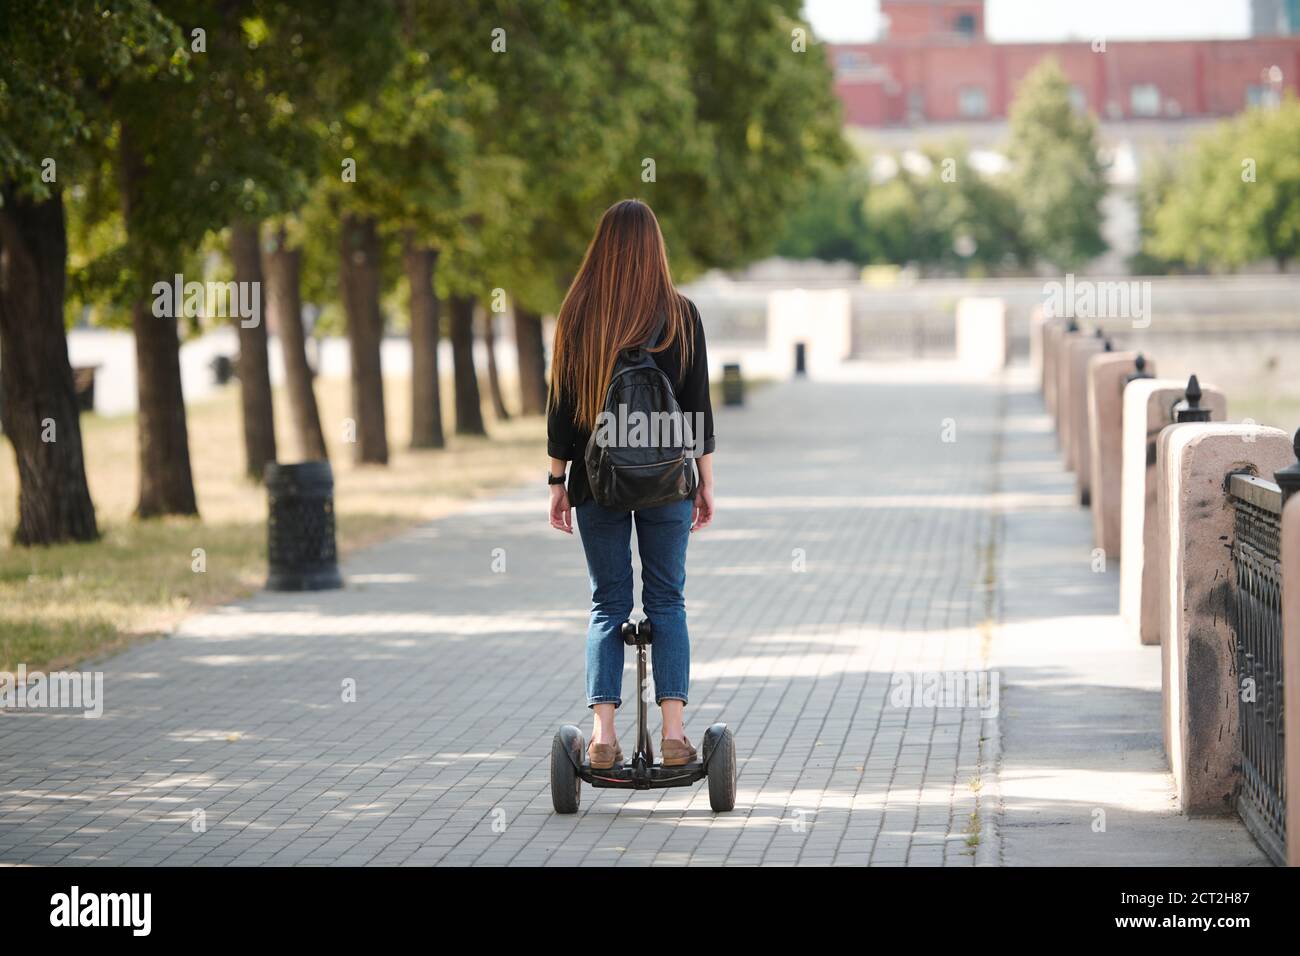 Back view of contemporary young businesswoman riding on gyroscope along road Stock Photo